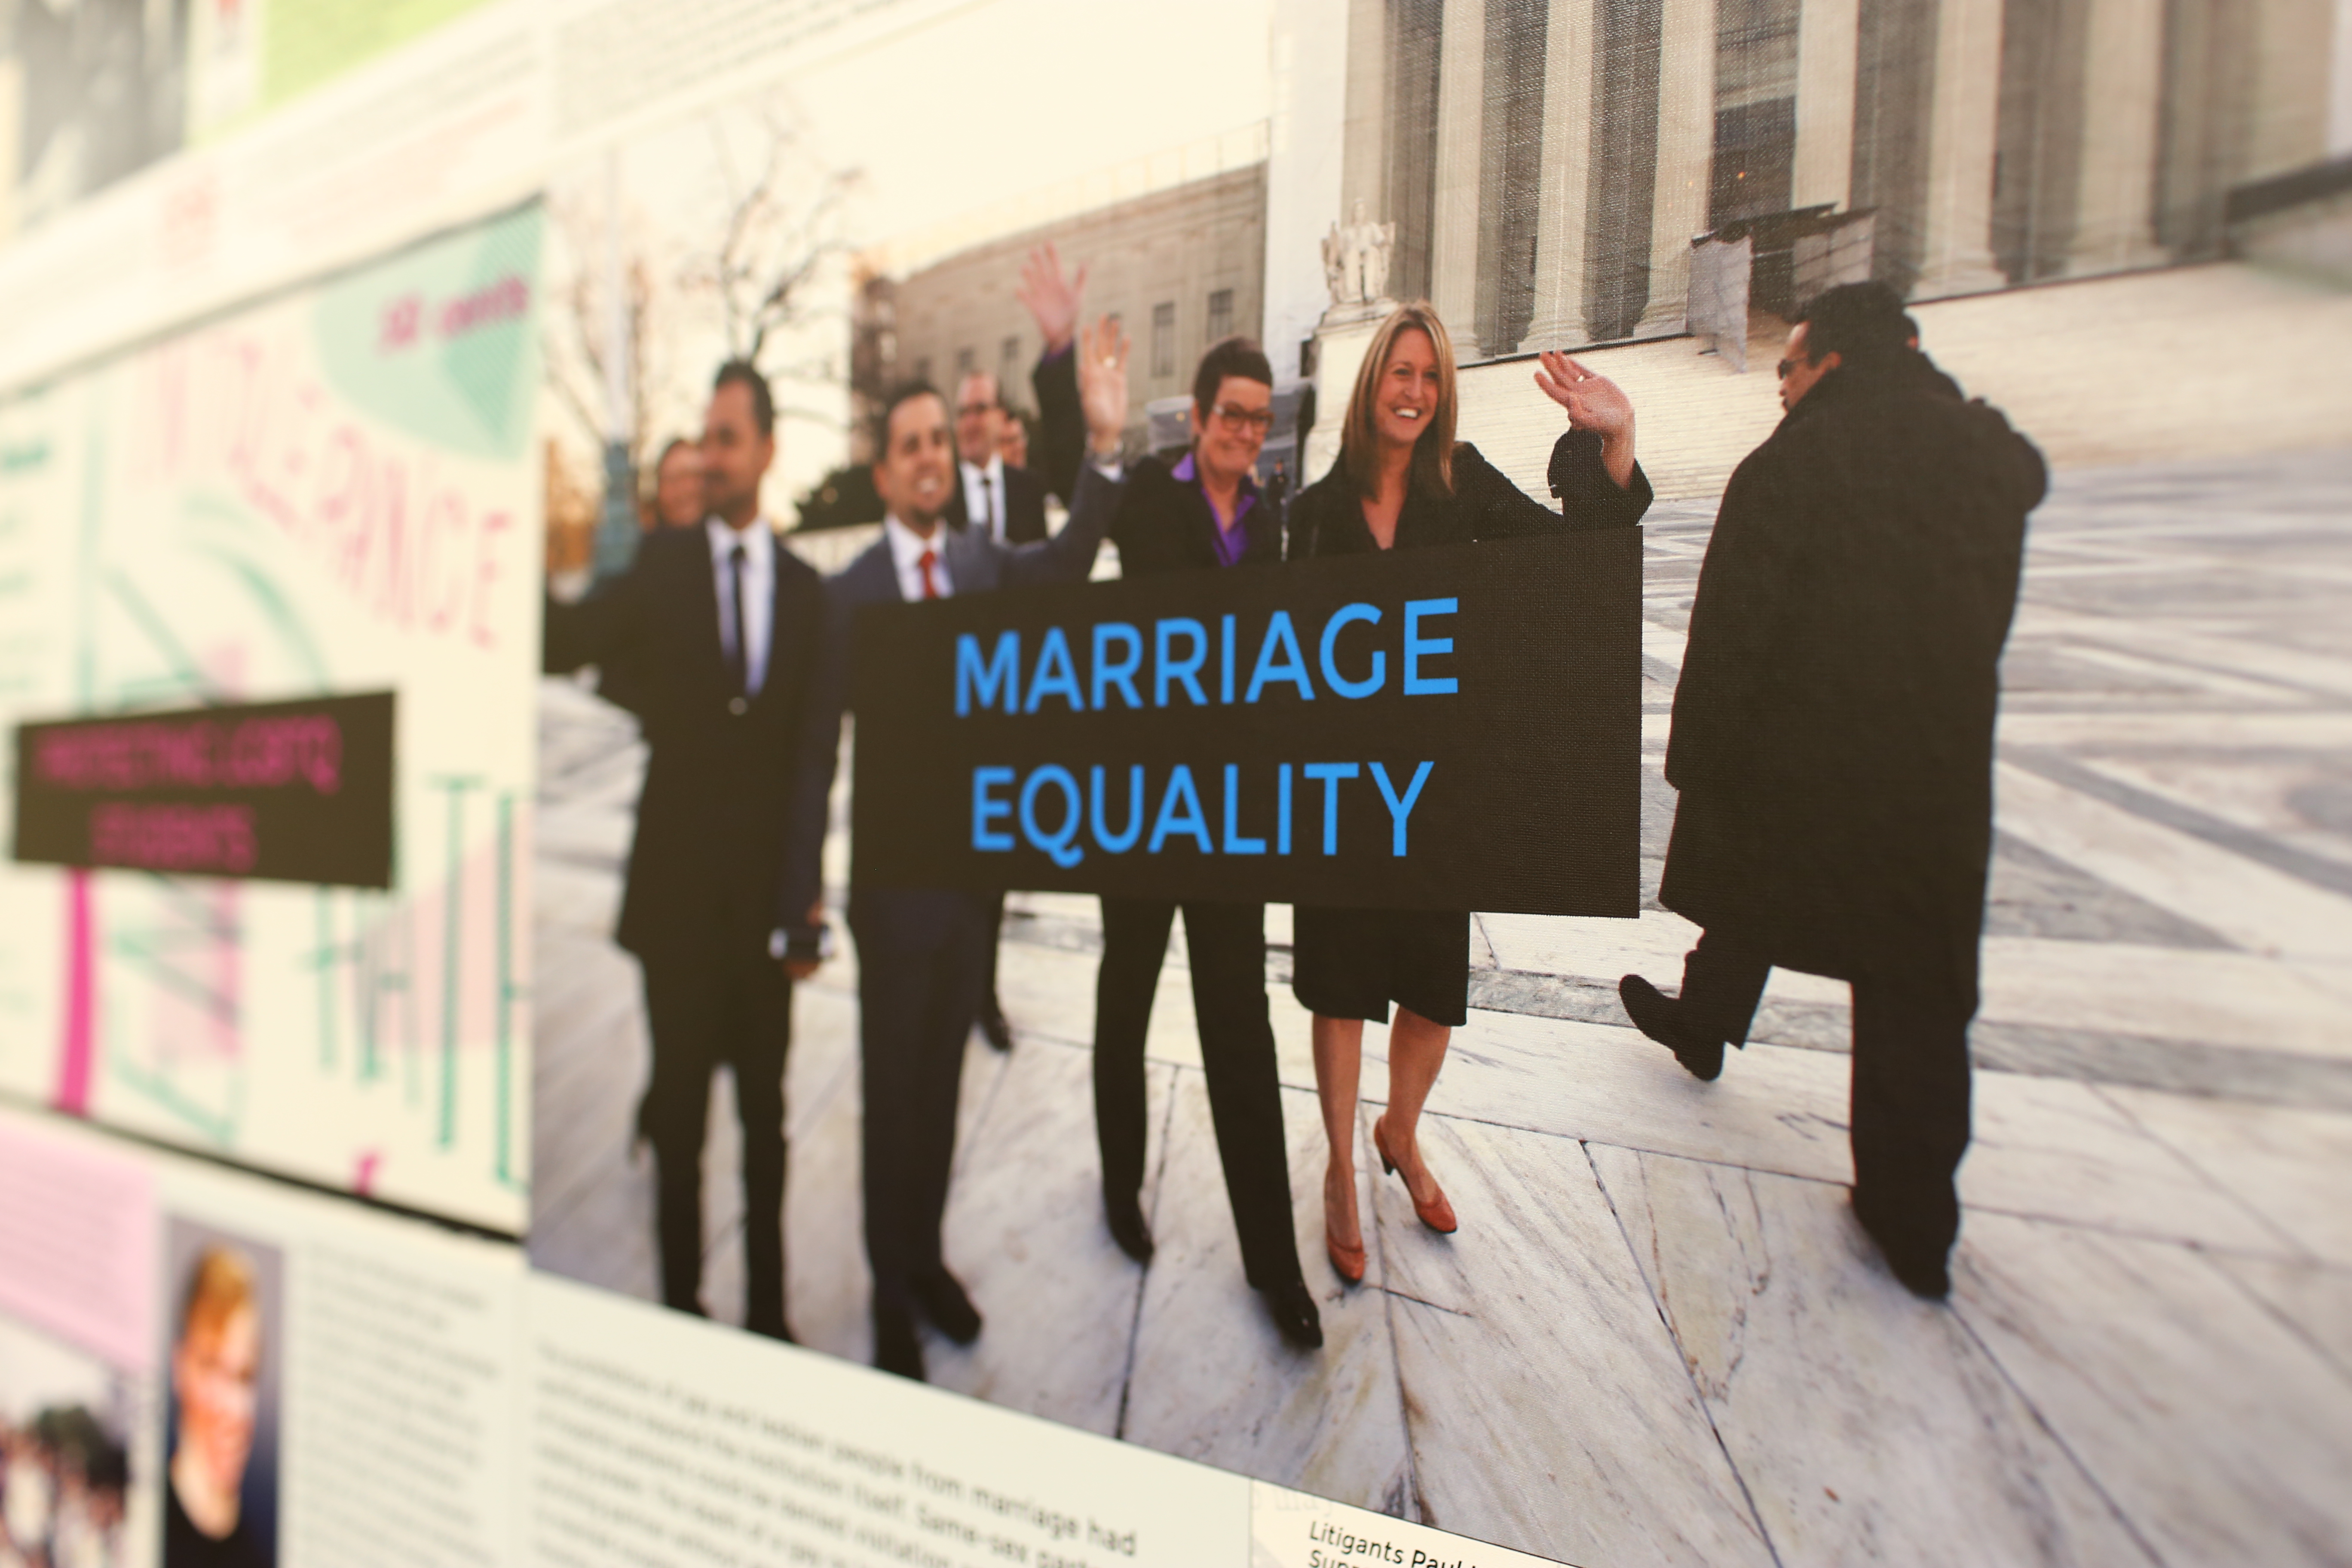 Closeup of the "Marriage Equality" poster from The History of the LGBTQ Civil rights Movement exhibit.